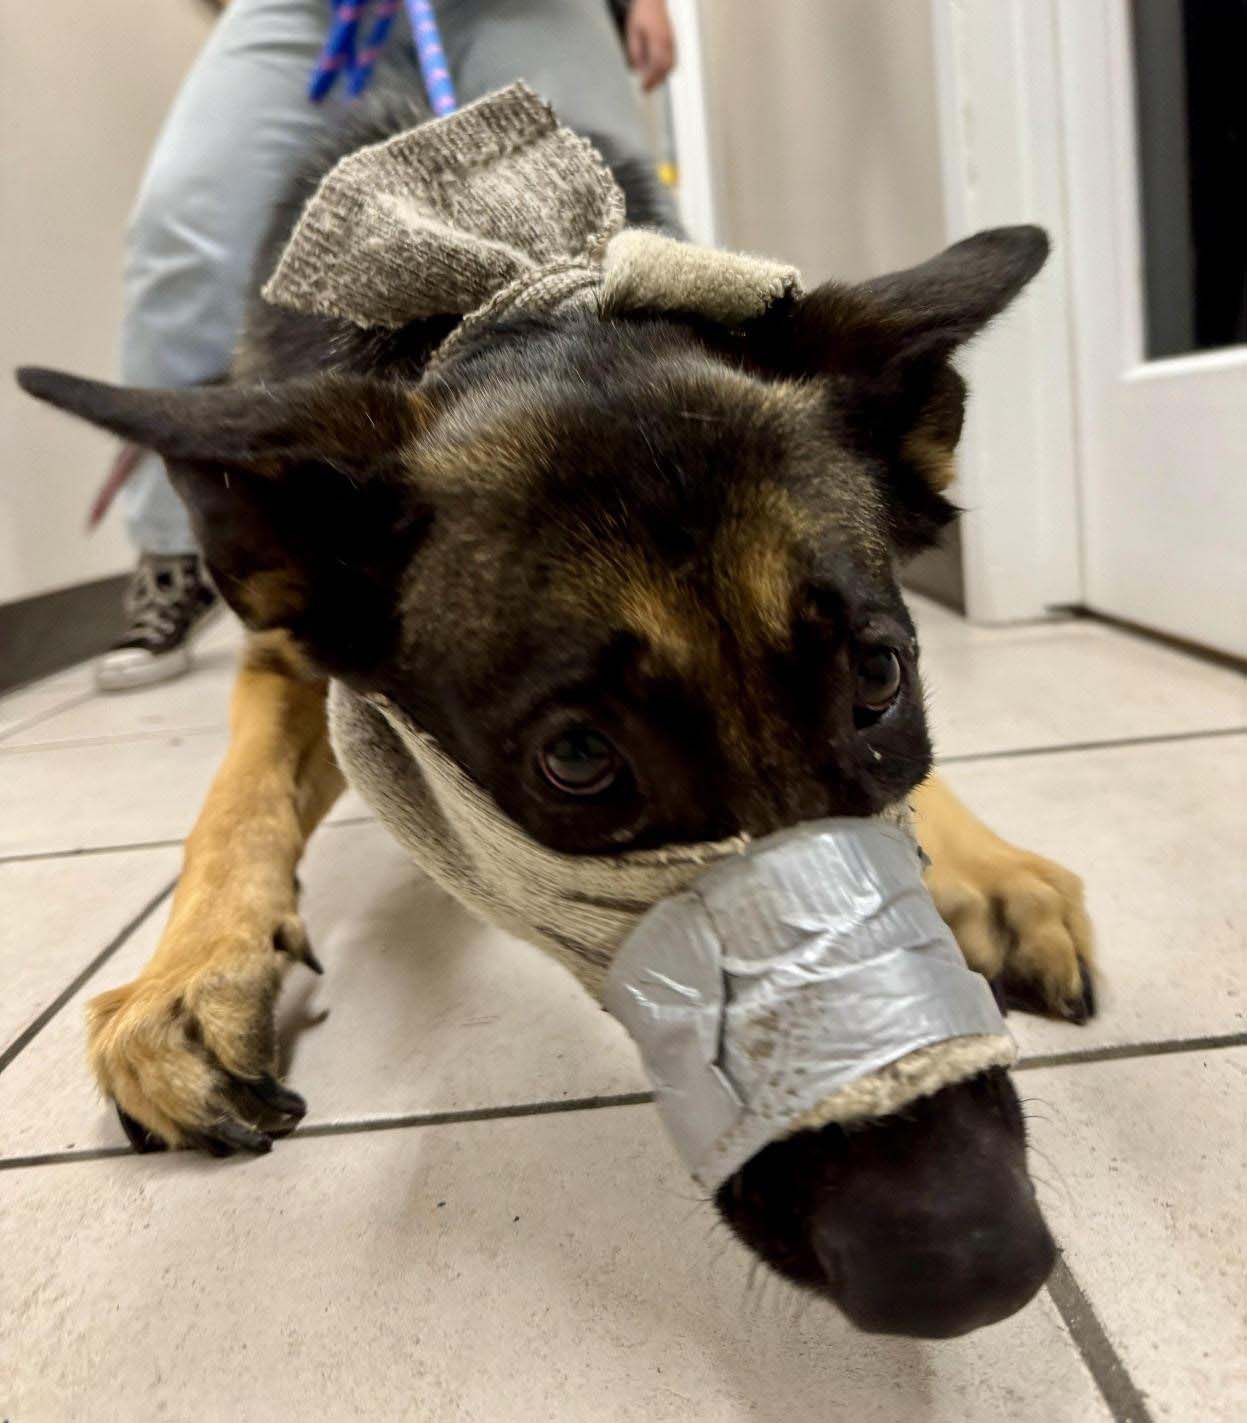 German shepherd with ‘happy tail syndrome’ arrives at BC SPCA in makeshift muzzle